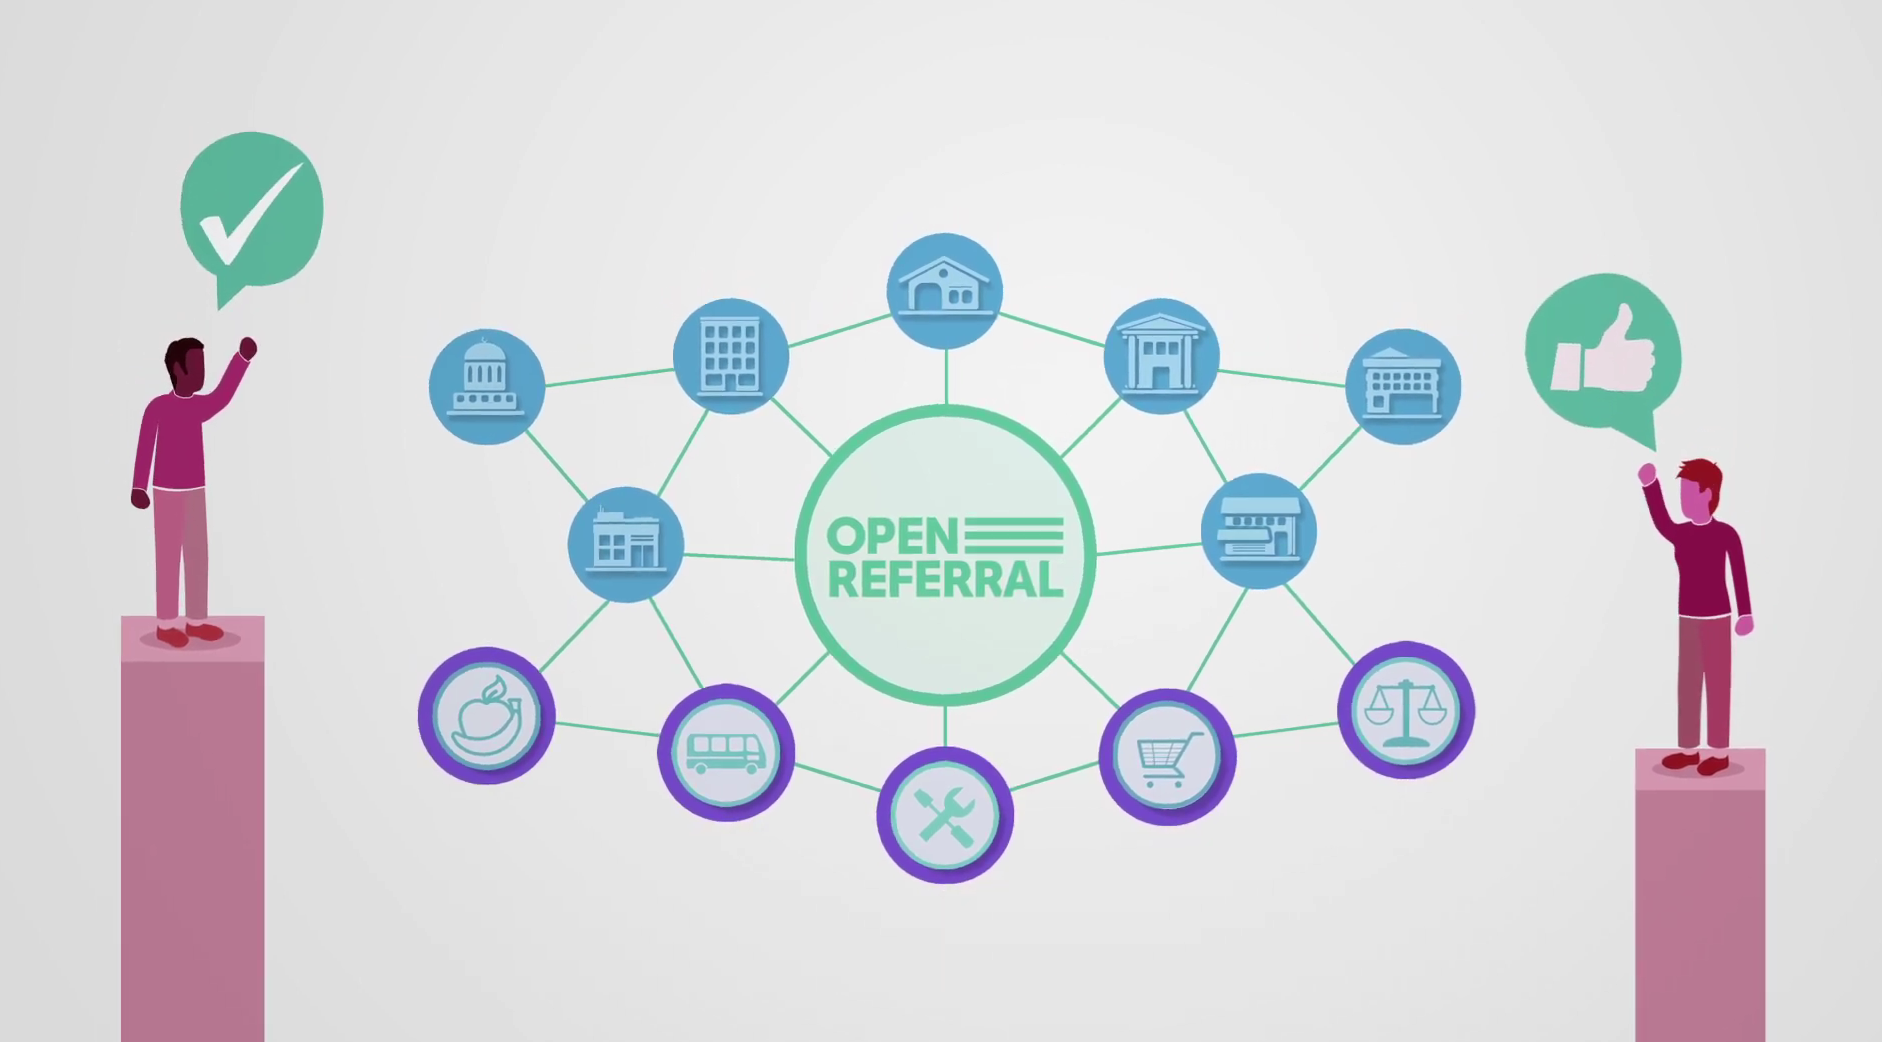 Our Video: Open Referral in Three Minutes